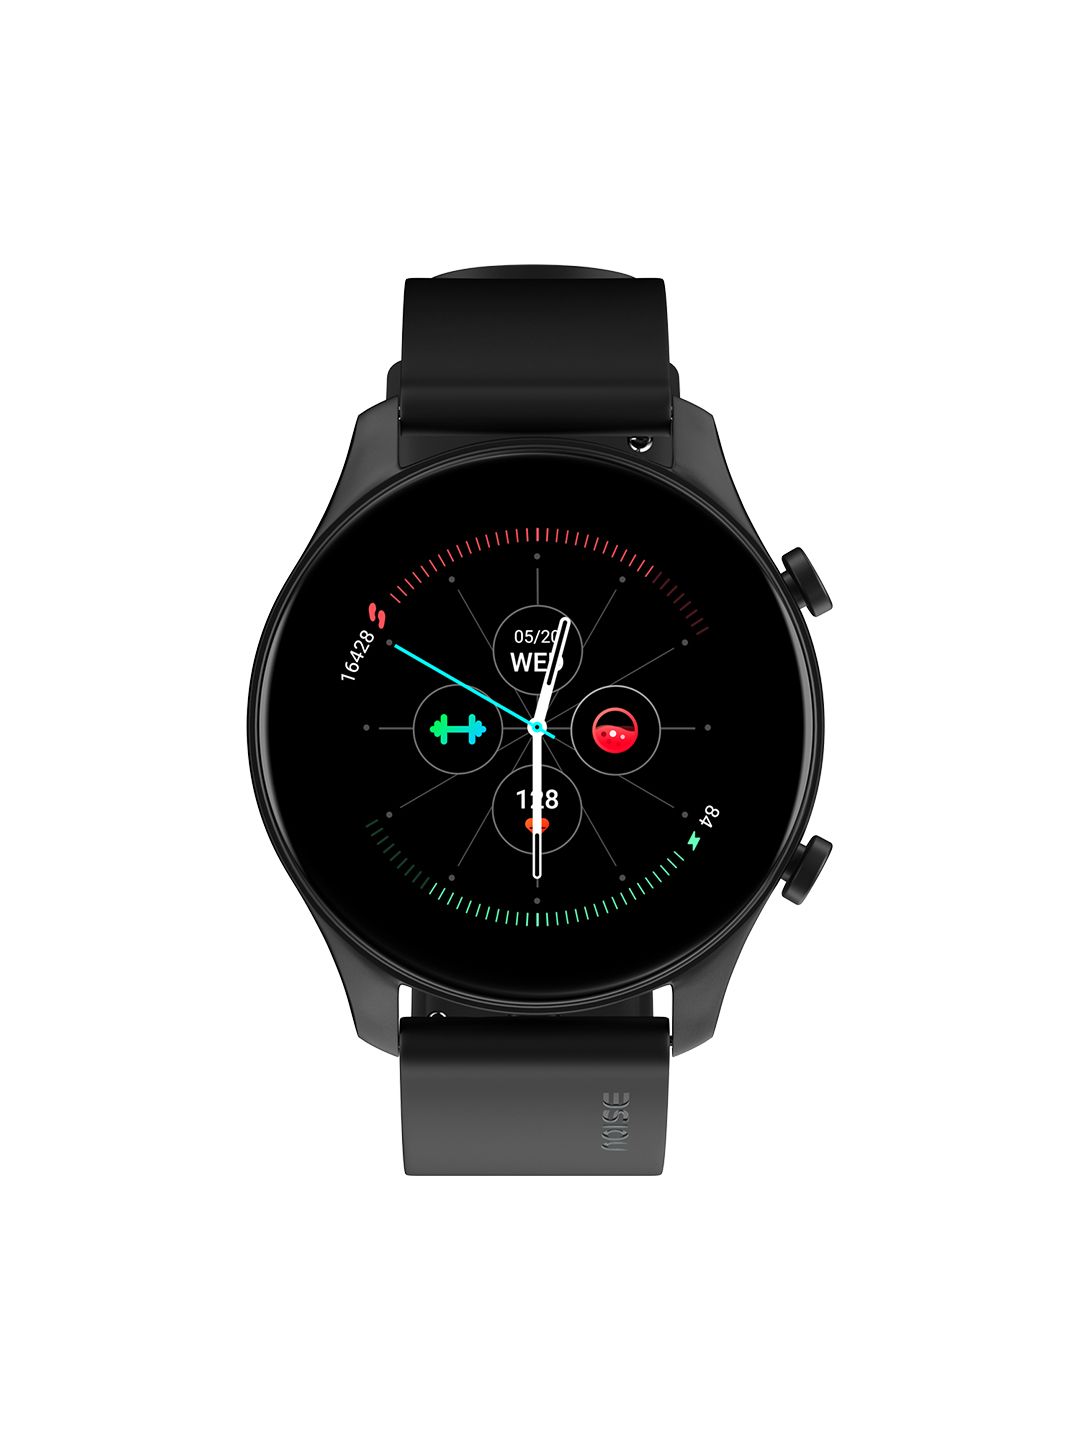 NOISE Fit Evolve 2 Smartwatch - Charcaol Black Price in India